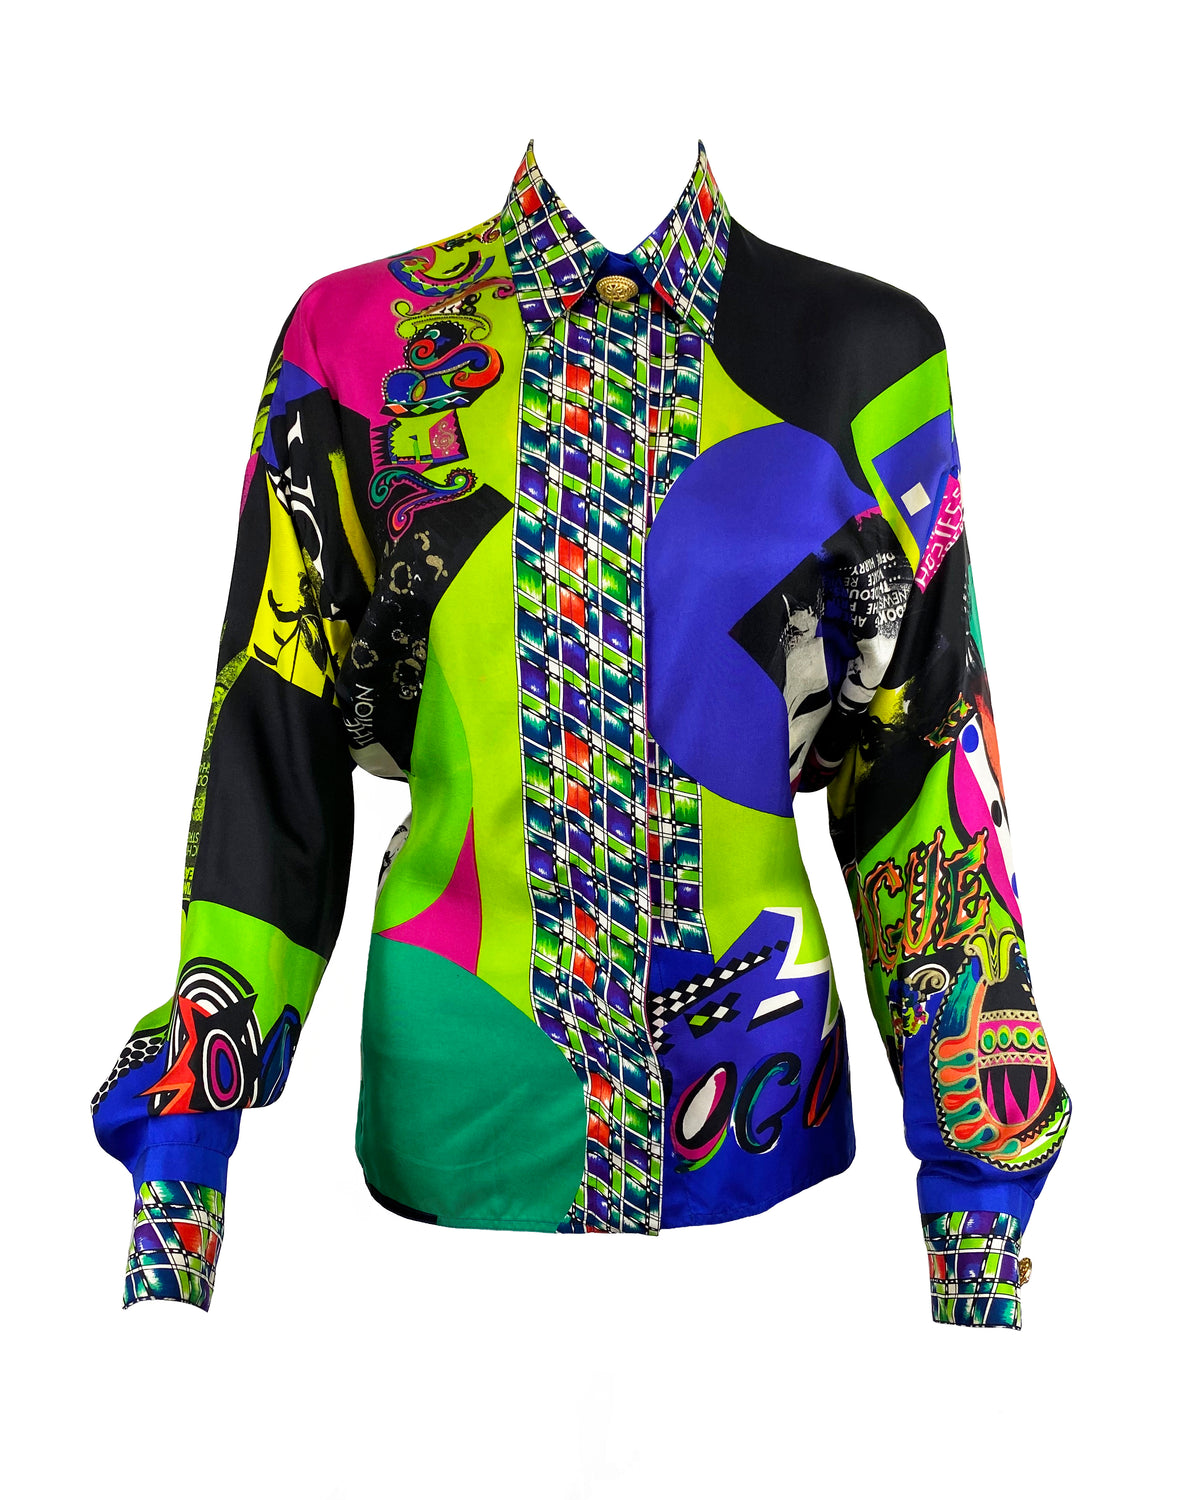 FRUIT Vintage Gianni Versace Vogue print silk shirt from the Spring 1991 collection. This is a very special, museum worthy piece! It features the iconic Vogue print in large scale all over and gold feature buttons on collar and cuff.